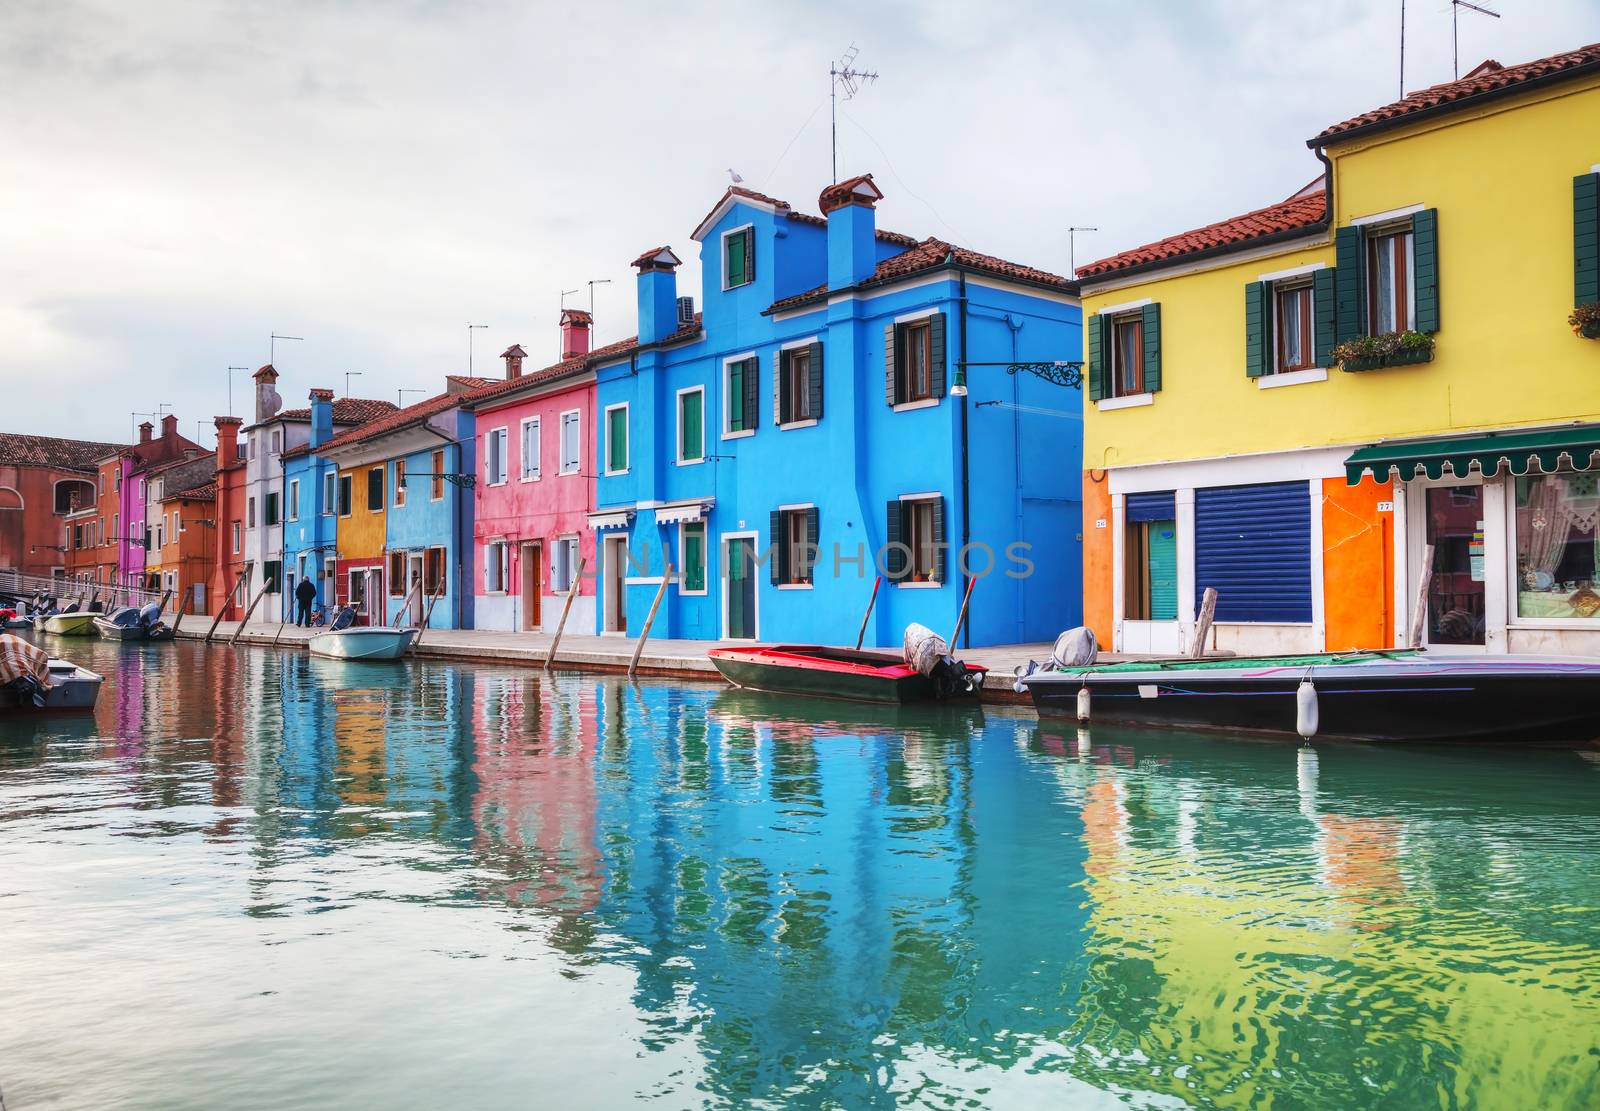 BURANO, ITALY - NOVEMBER 23: Brightly painted houses at the Burano canal on November 23, 2015 in Burano, Venice, Italy. It's an island in the Venetian Lagoon, northern Italy.